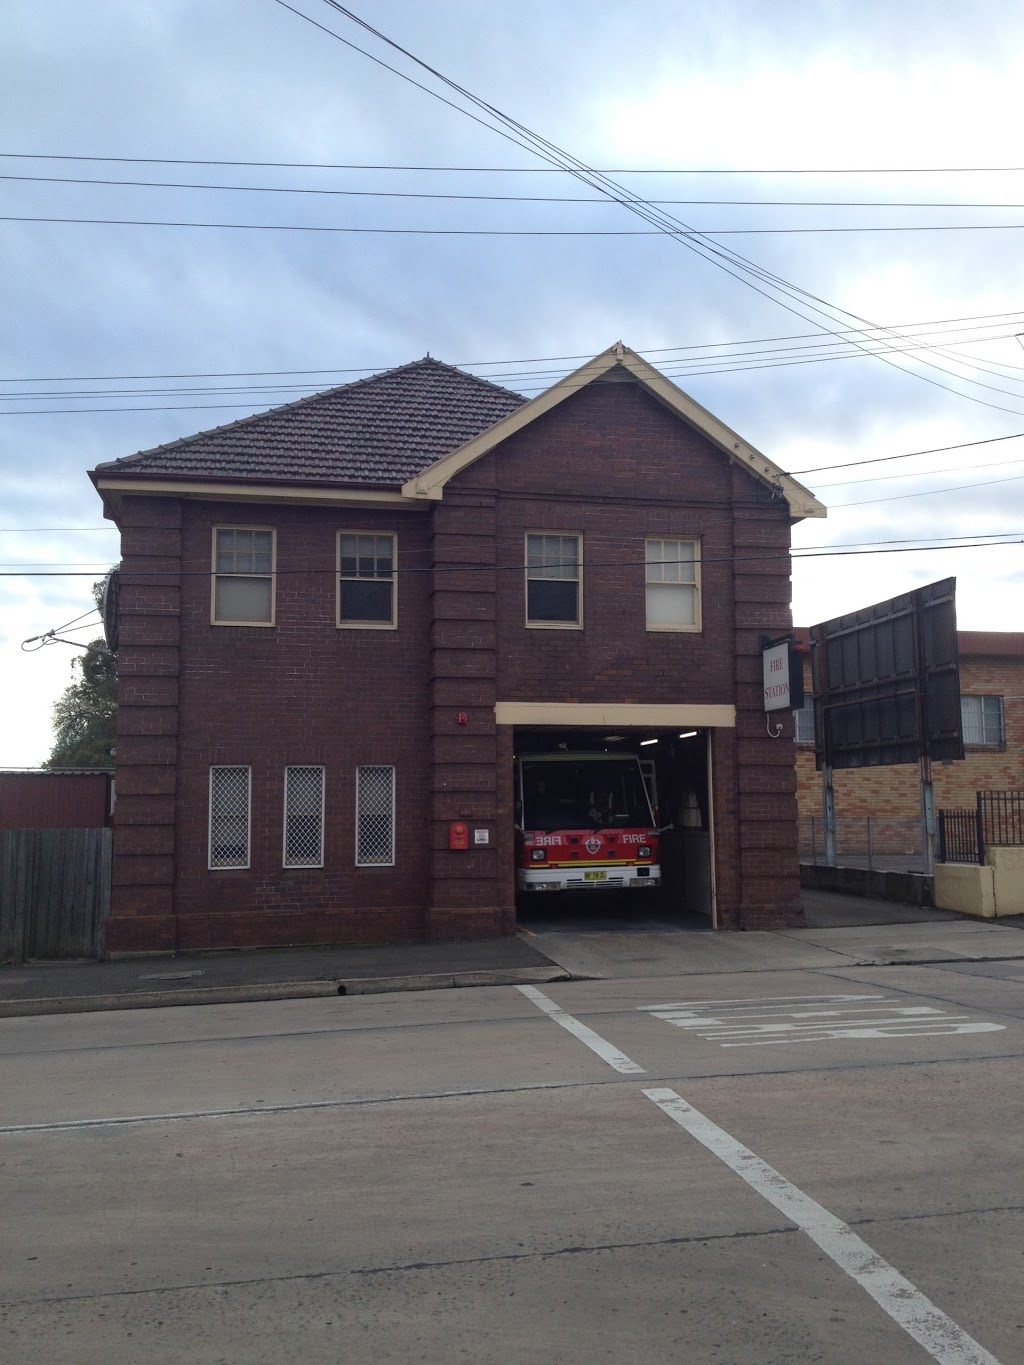 Fire and Rescue NSW Guildford Fire Station | fire station | 263 Guildford Rd, Guildford NSW 2161, Australia | 0296326856 OR +61 2 9632 6856